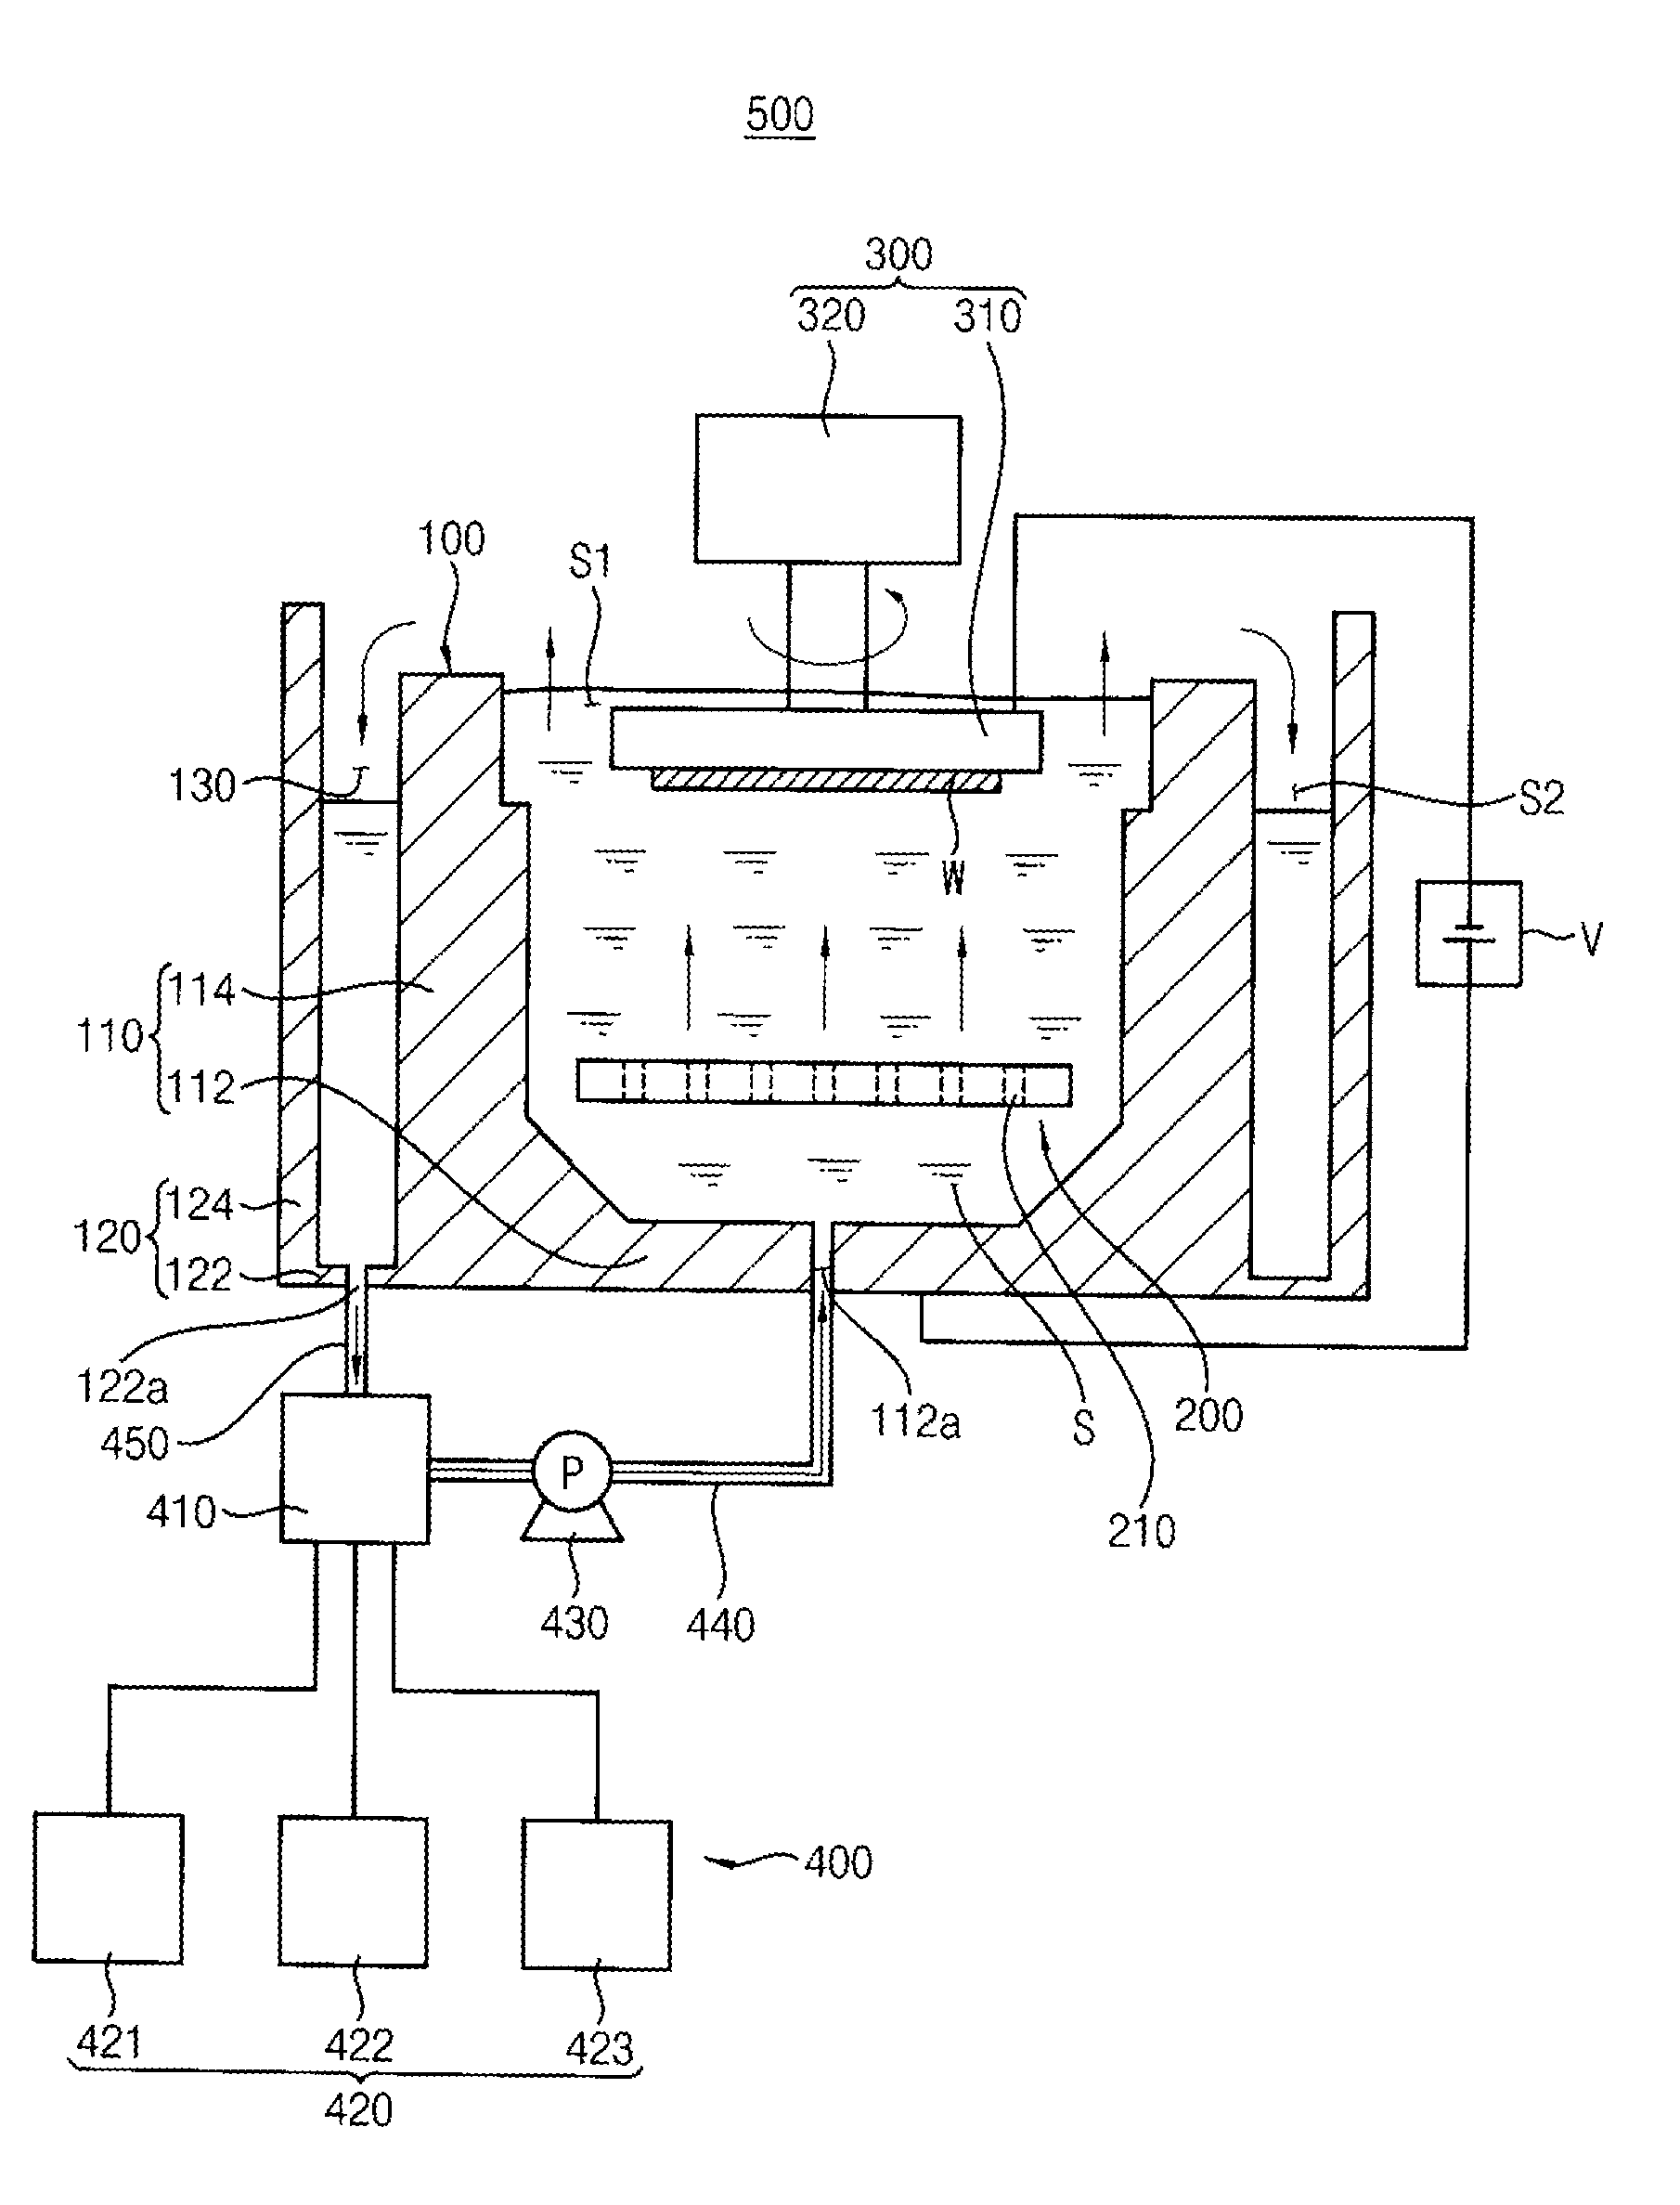 Copper electroplating solution and copper electroplating apparatus